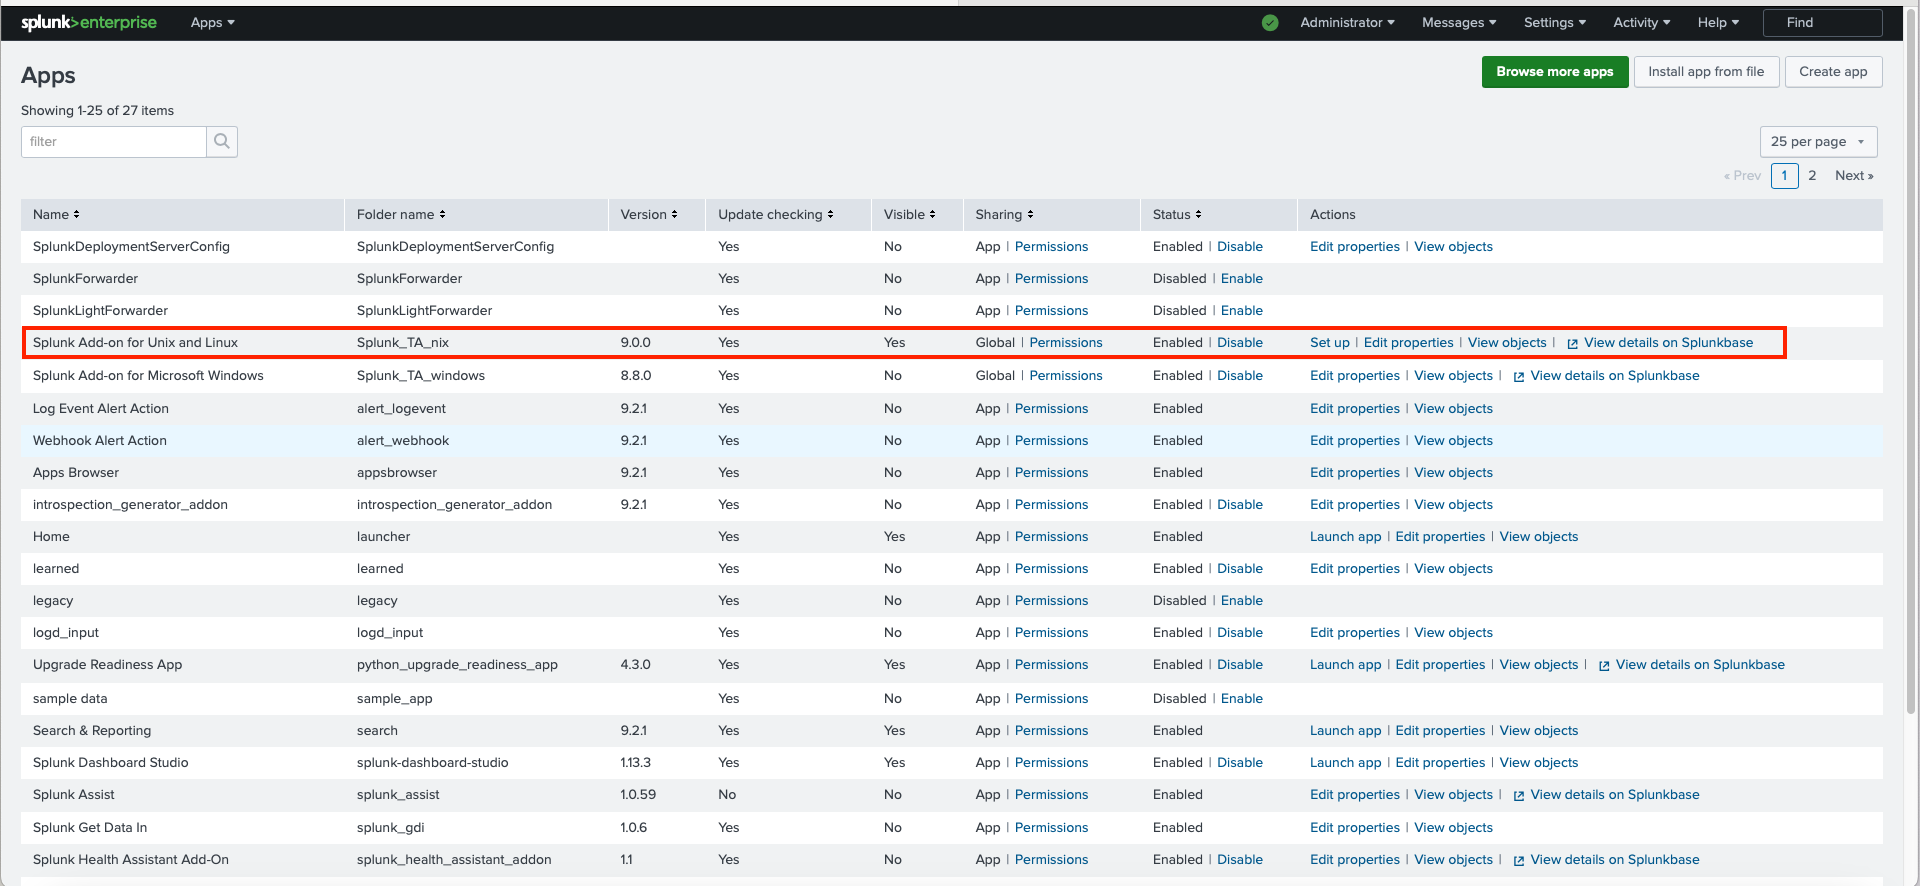 List of apps in Splunk Enterprise management interface, including the newly installed Splunk Add-on for Unix and Linux.